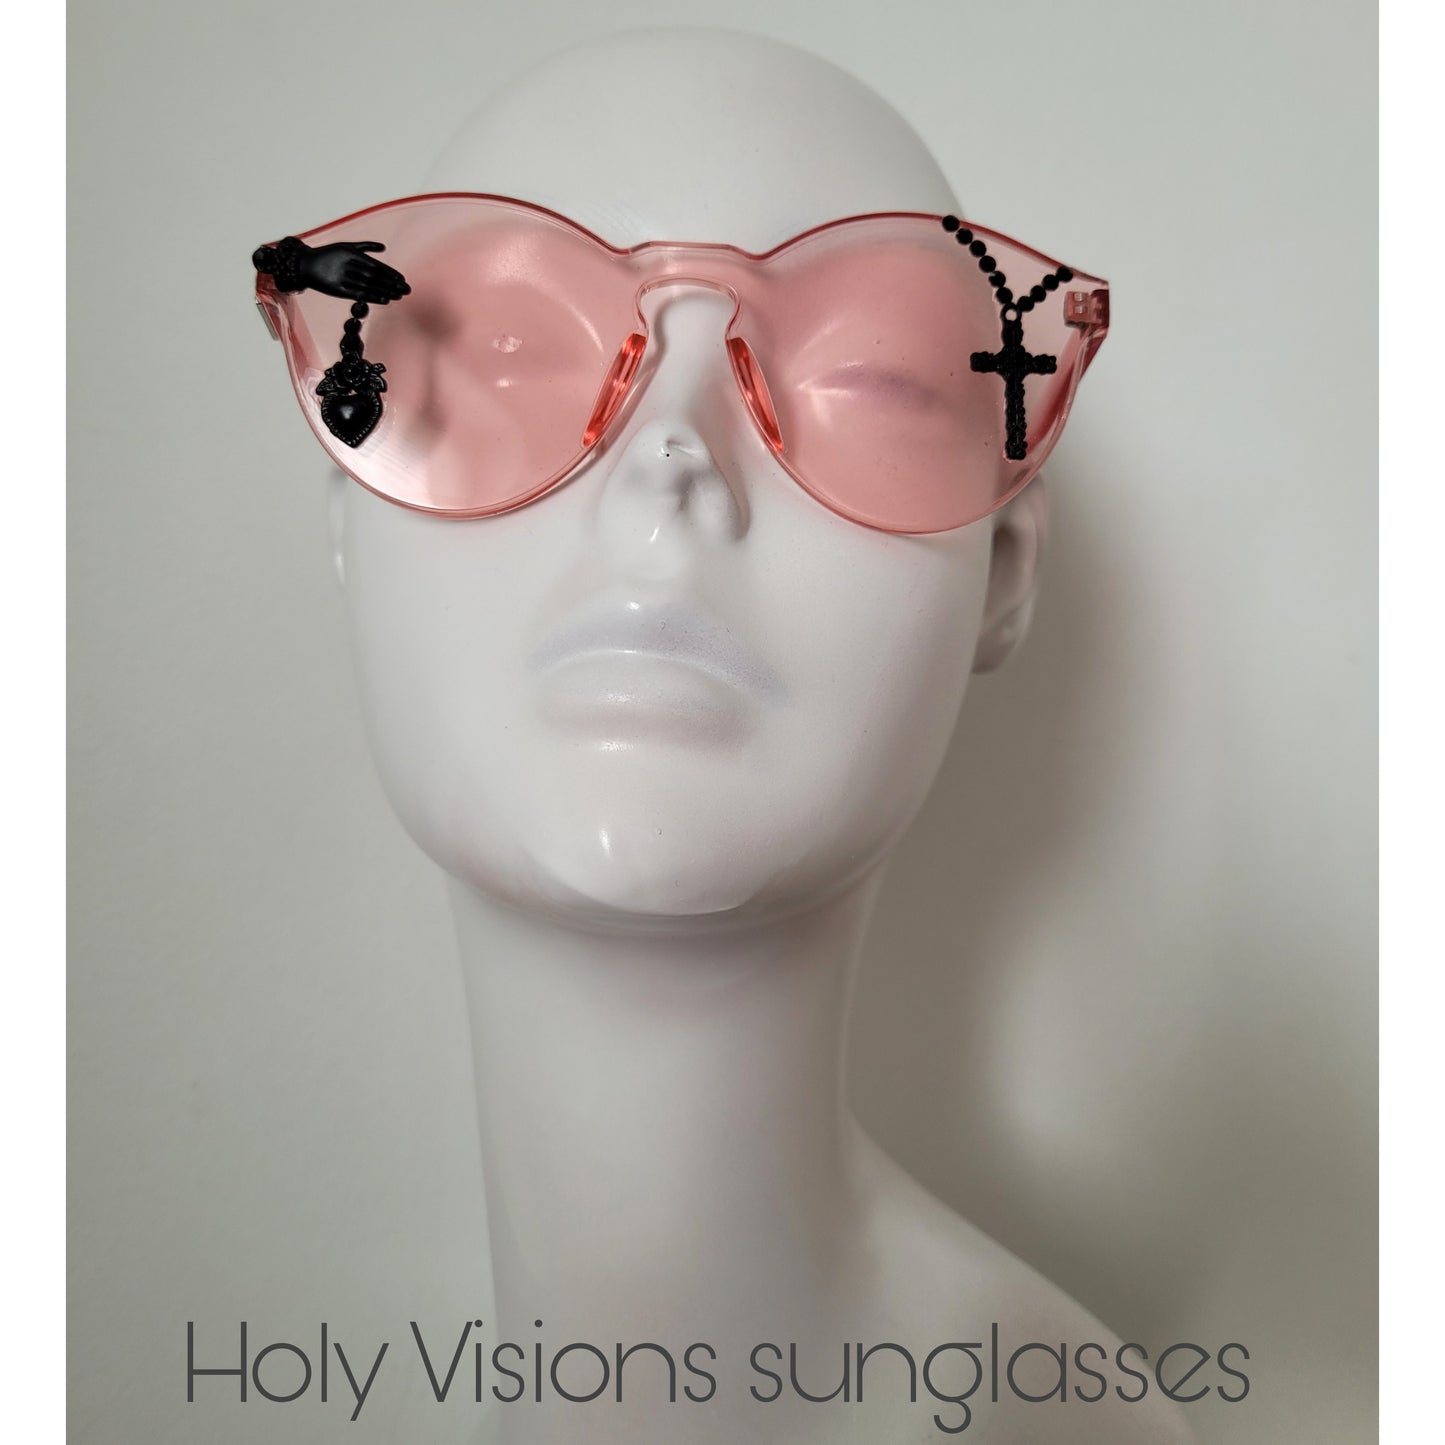 Plexi Visions collection: The Holy Visions sunglasses, limited edition design with sacred heart & crucifix (3 colours)